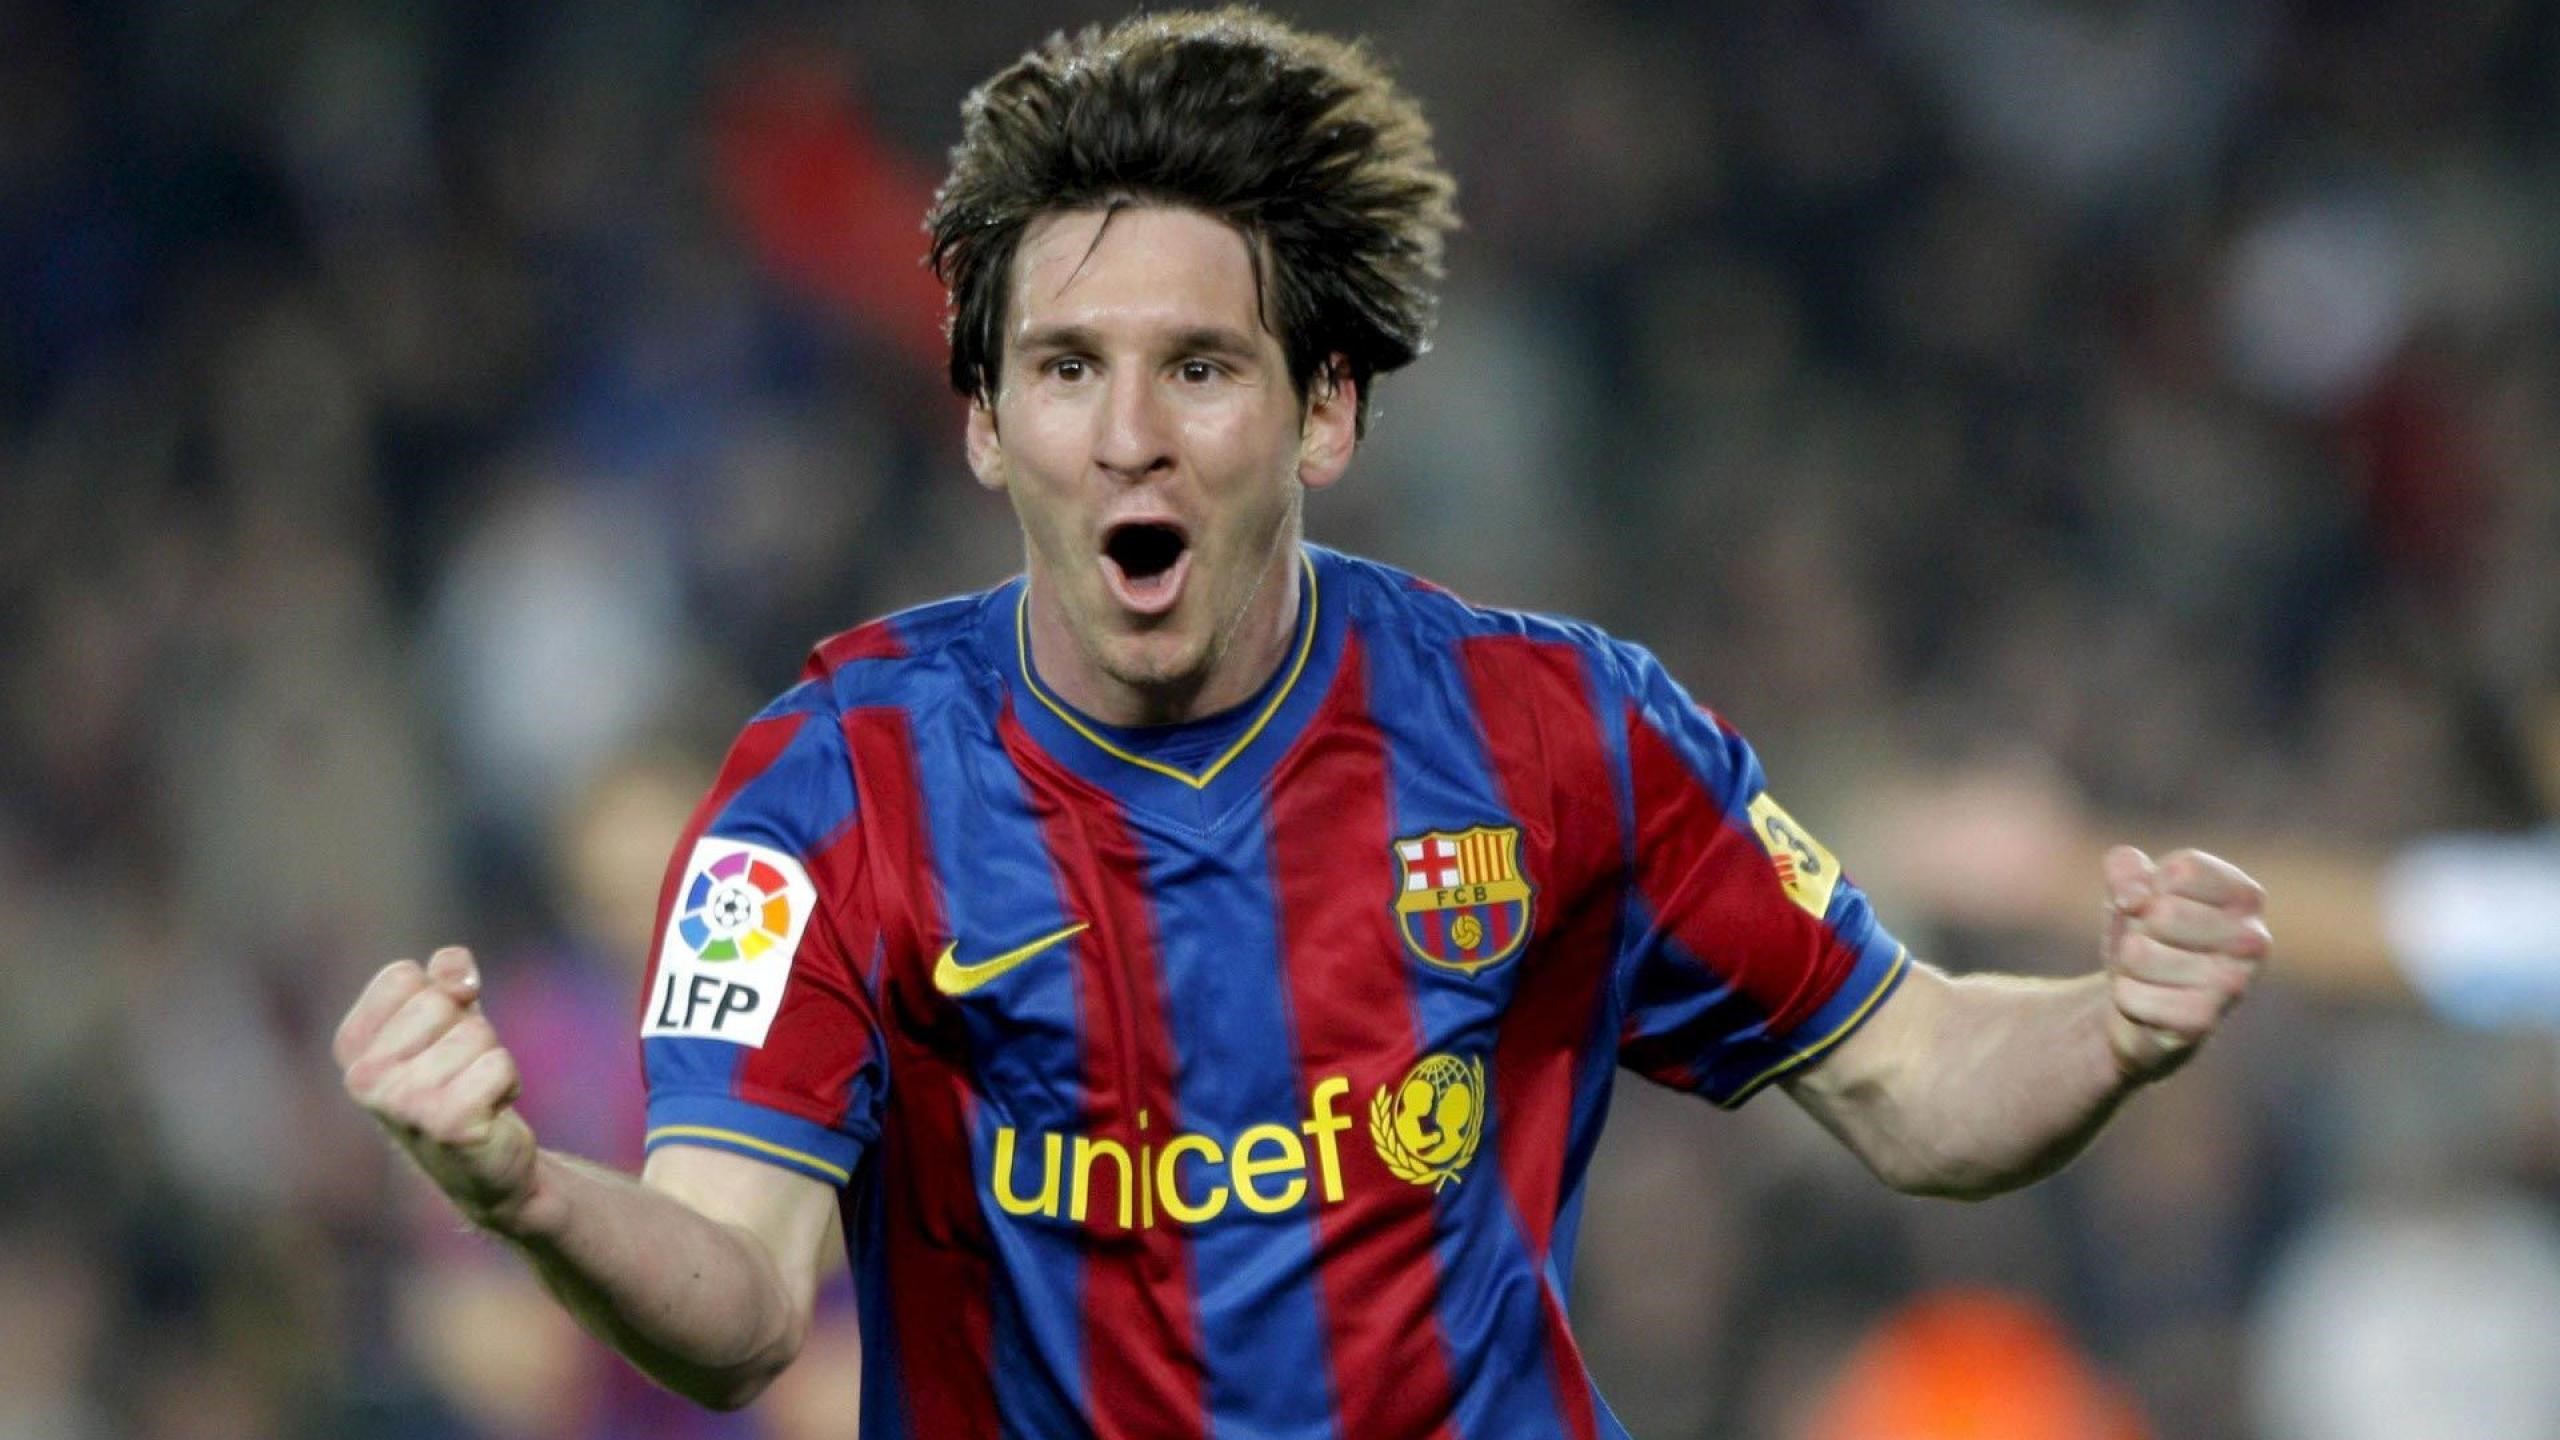 Lionel Messi Best Football Player Wallpaper HD Wallpapers 2560x1440